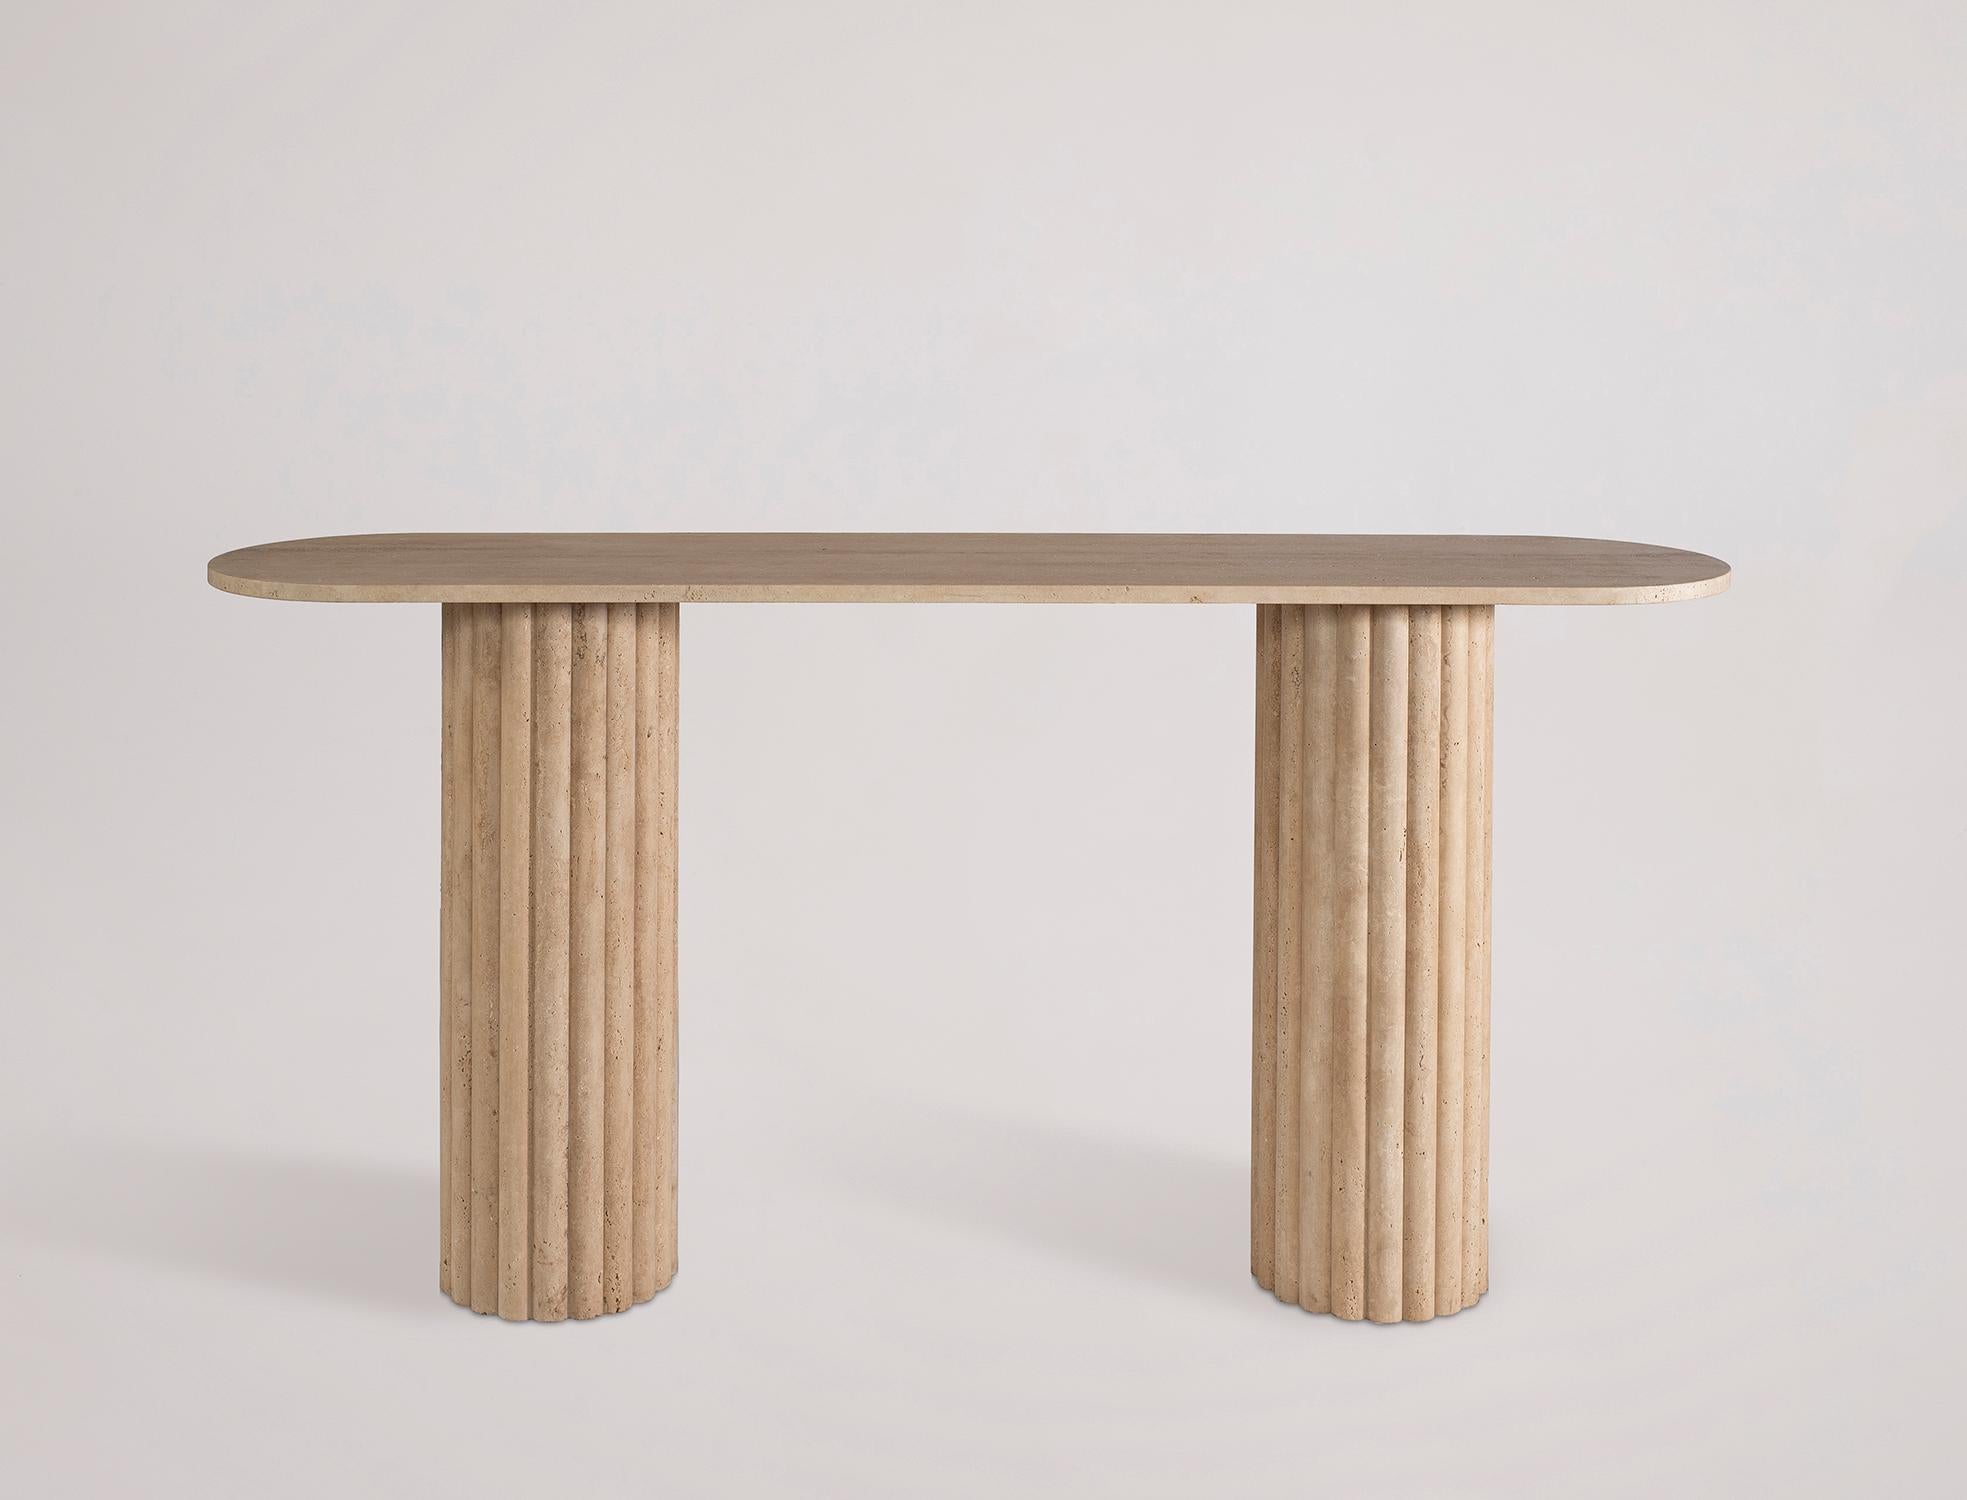 Contemporary Rima Console Table in Travertine Marble, Made in Mexico by Peca For Sale